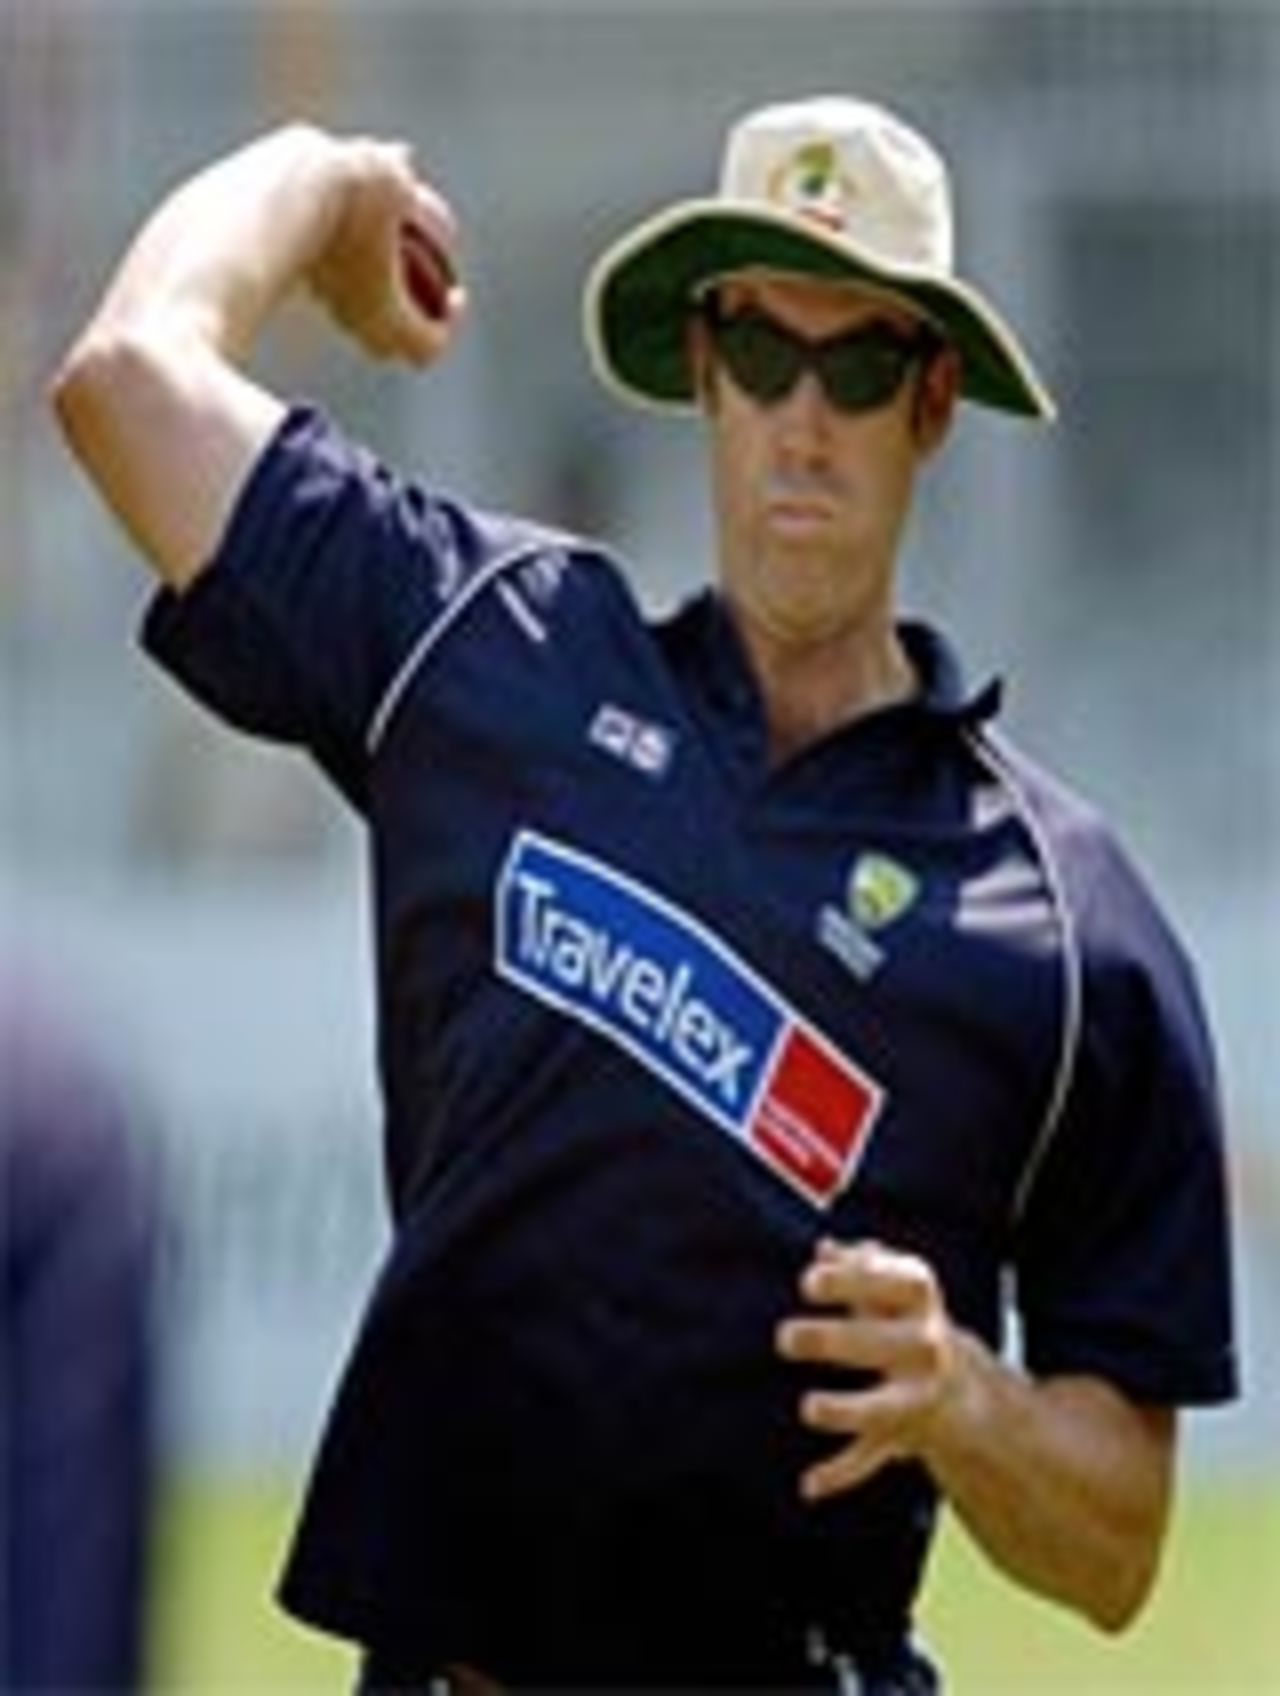 Matthew Hayden throws a ball during practice ahead of the 3rd Test against India, October 2004